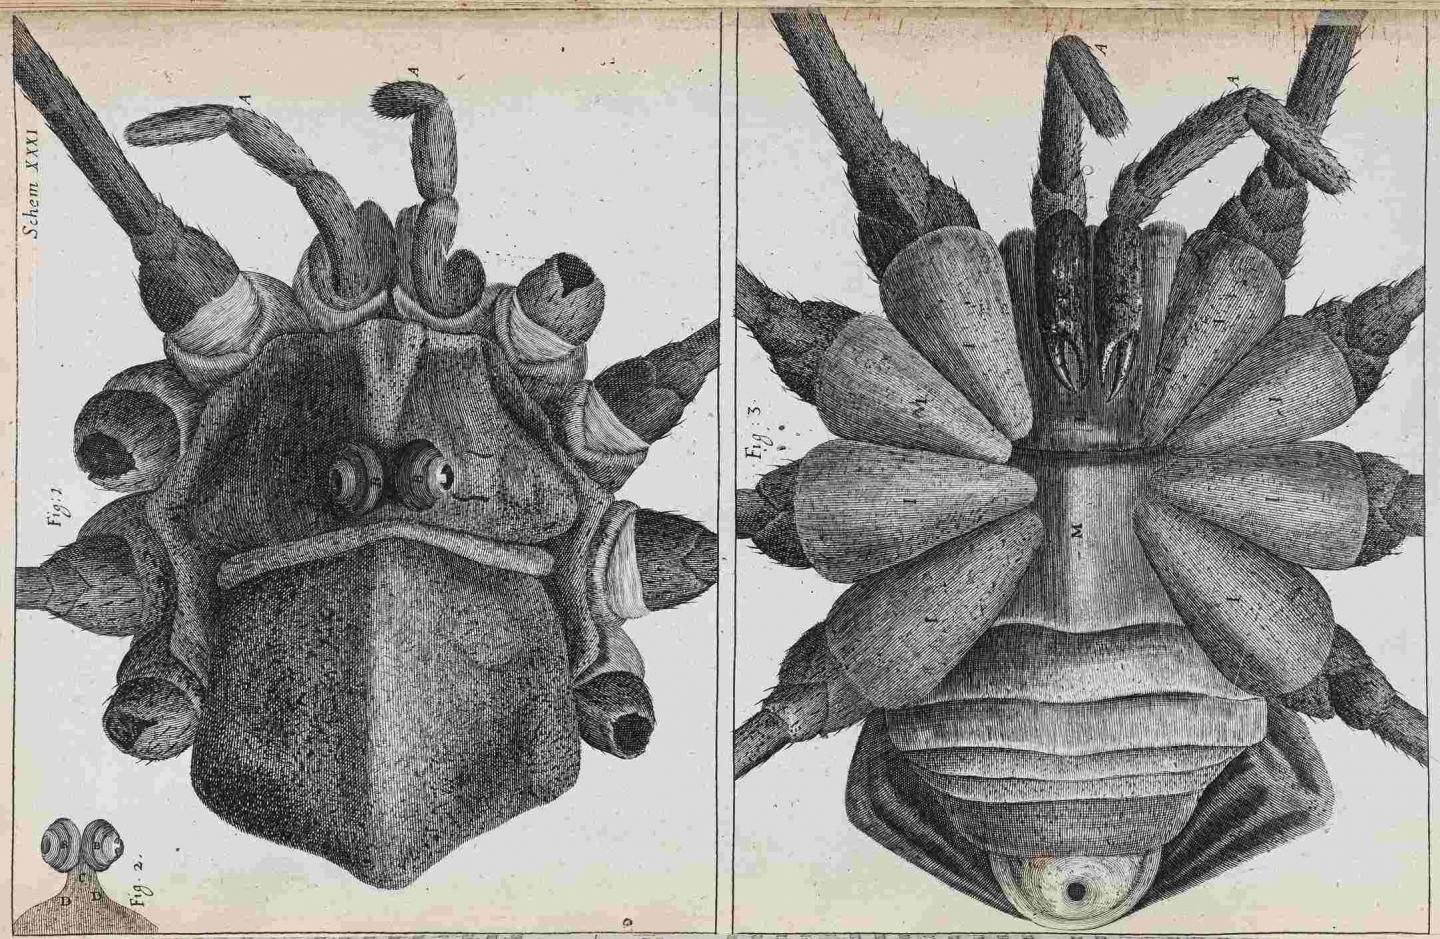 Microscopic views of the Shepherd spider, Schem. XXXI from Micrographia: or some physiological descriptions of minute bodies made by magnifying glasses with observations and Inquiries thereupon, by Robert Hooke (London, 1665) RS.9450 © The Royal Society